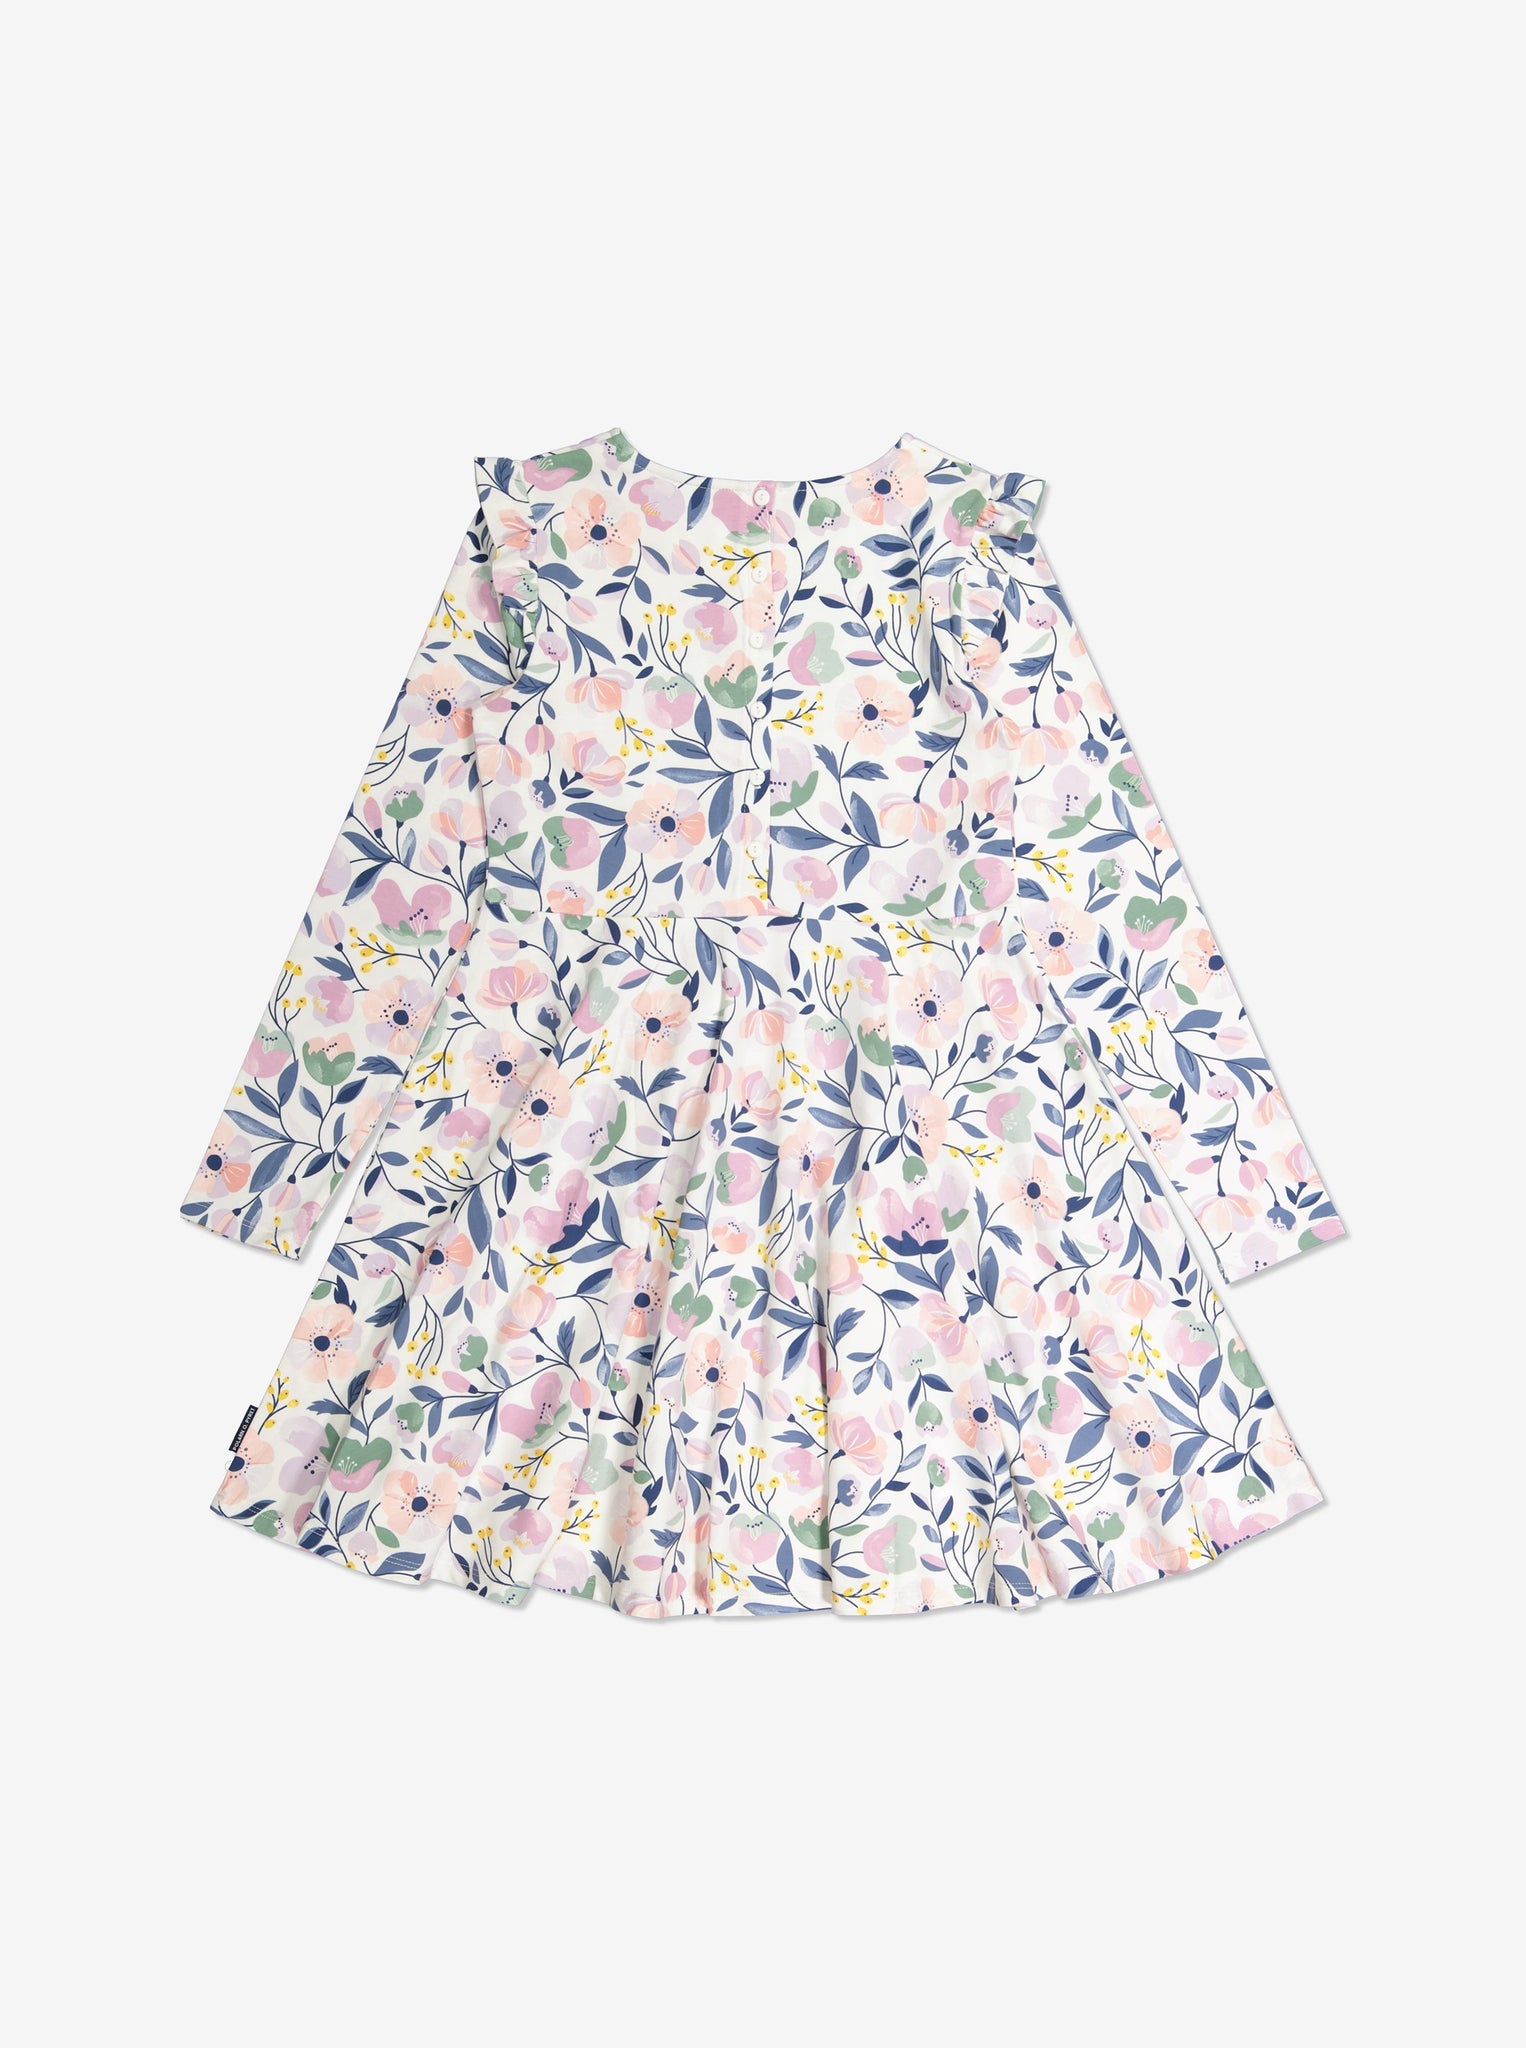  Organic White Floral Girls Dress from Polarn O. Pyret Kidswear. Made from sustainable materials.